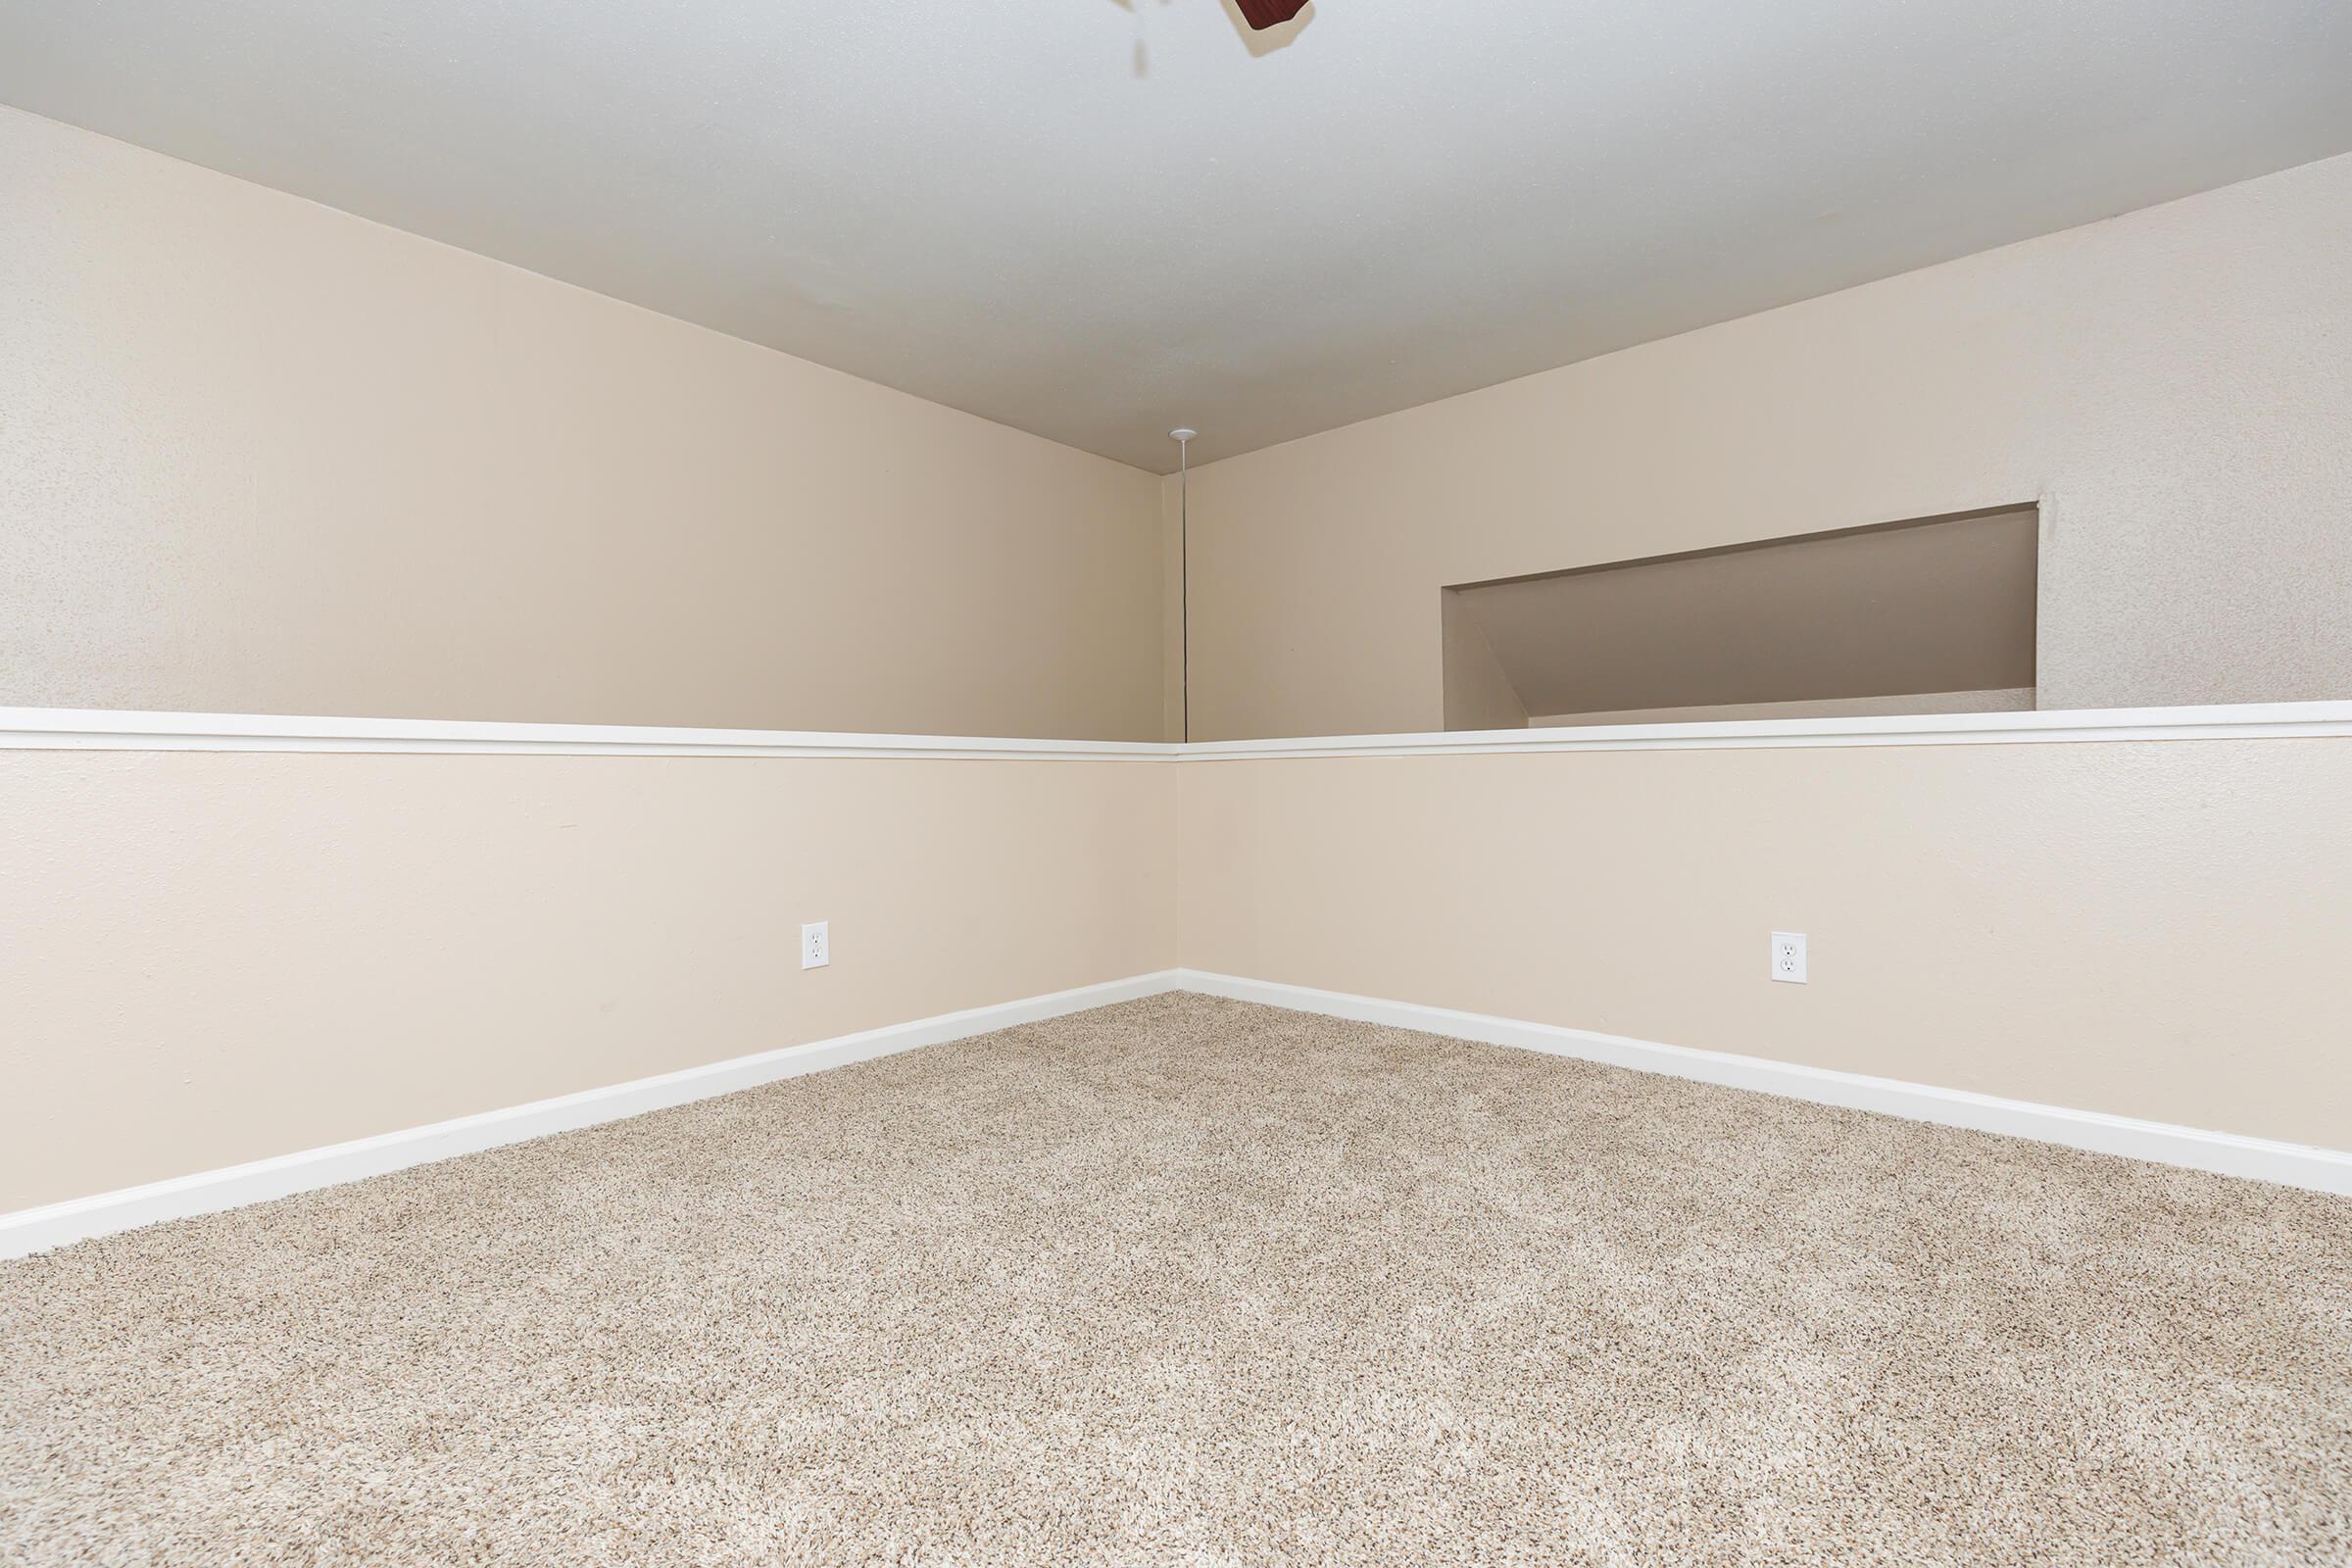 CEILING FANS AND PLUSH CARPETING